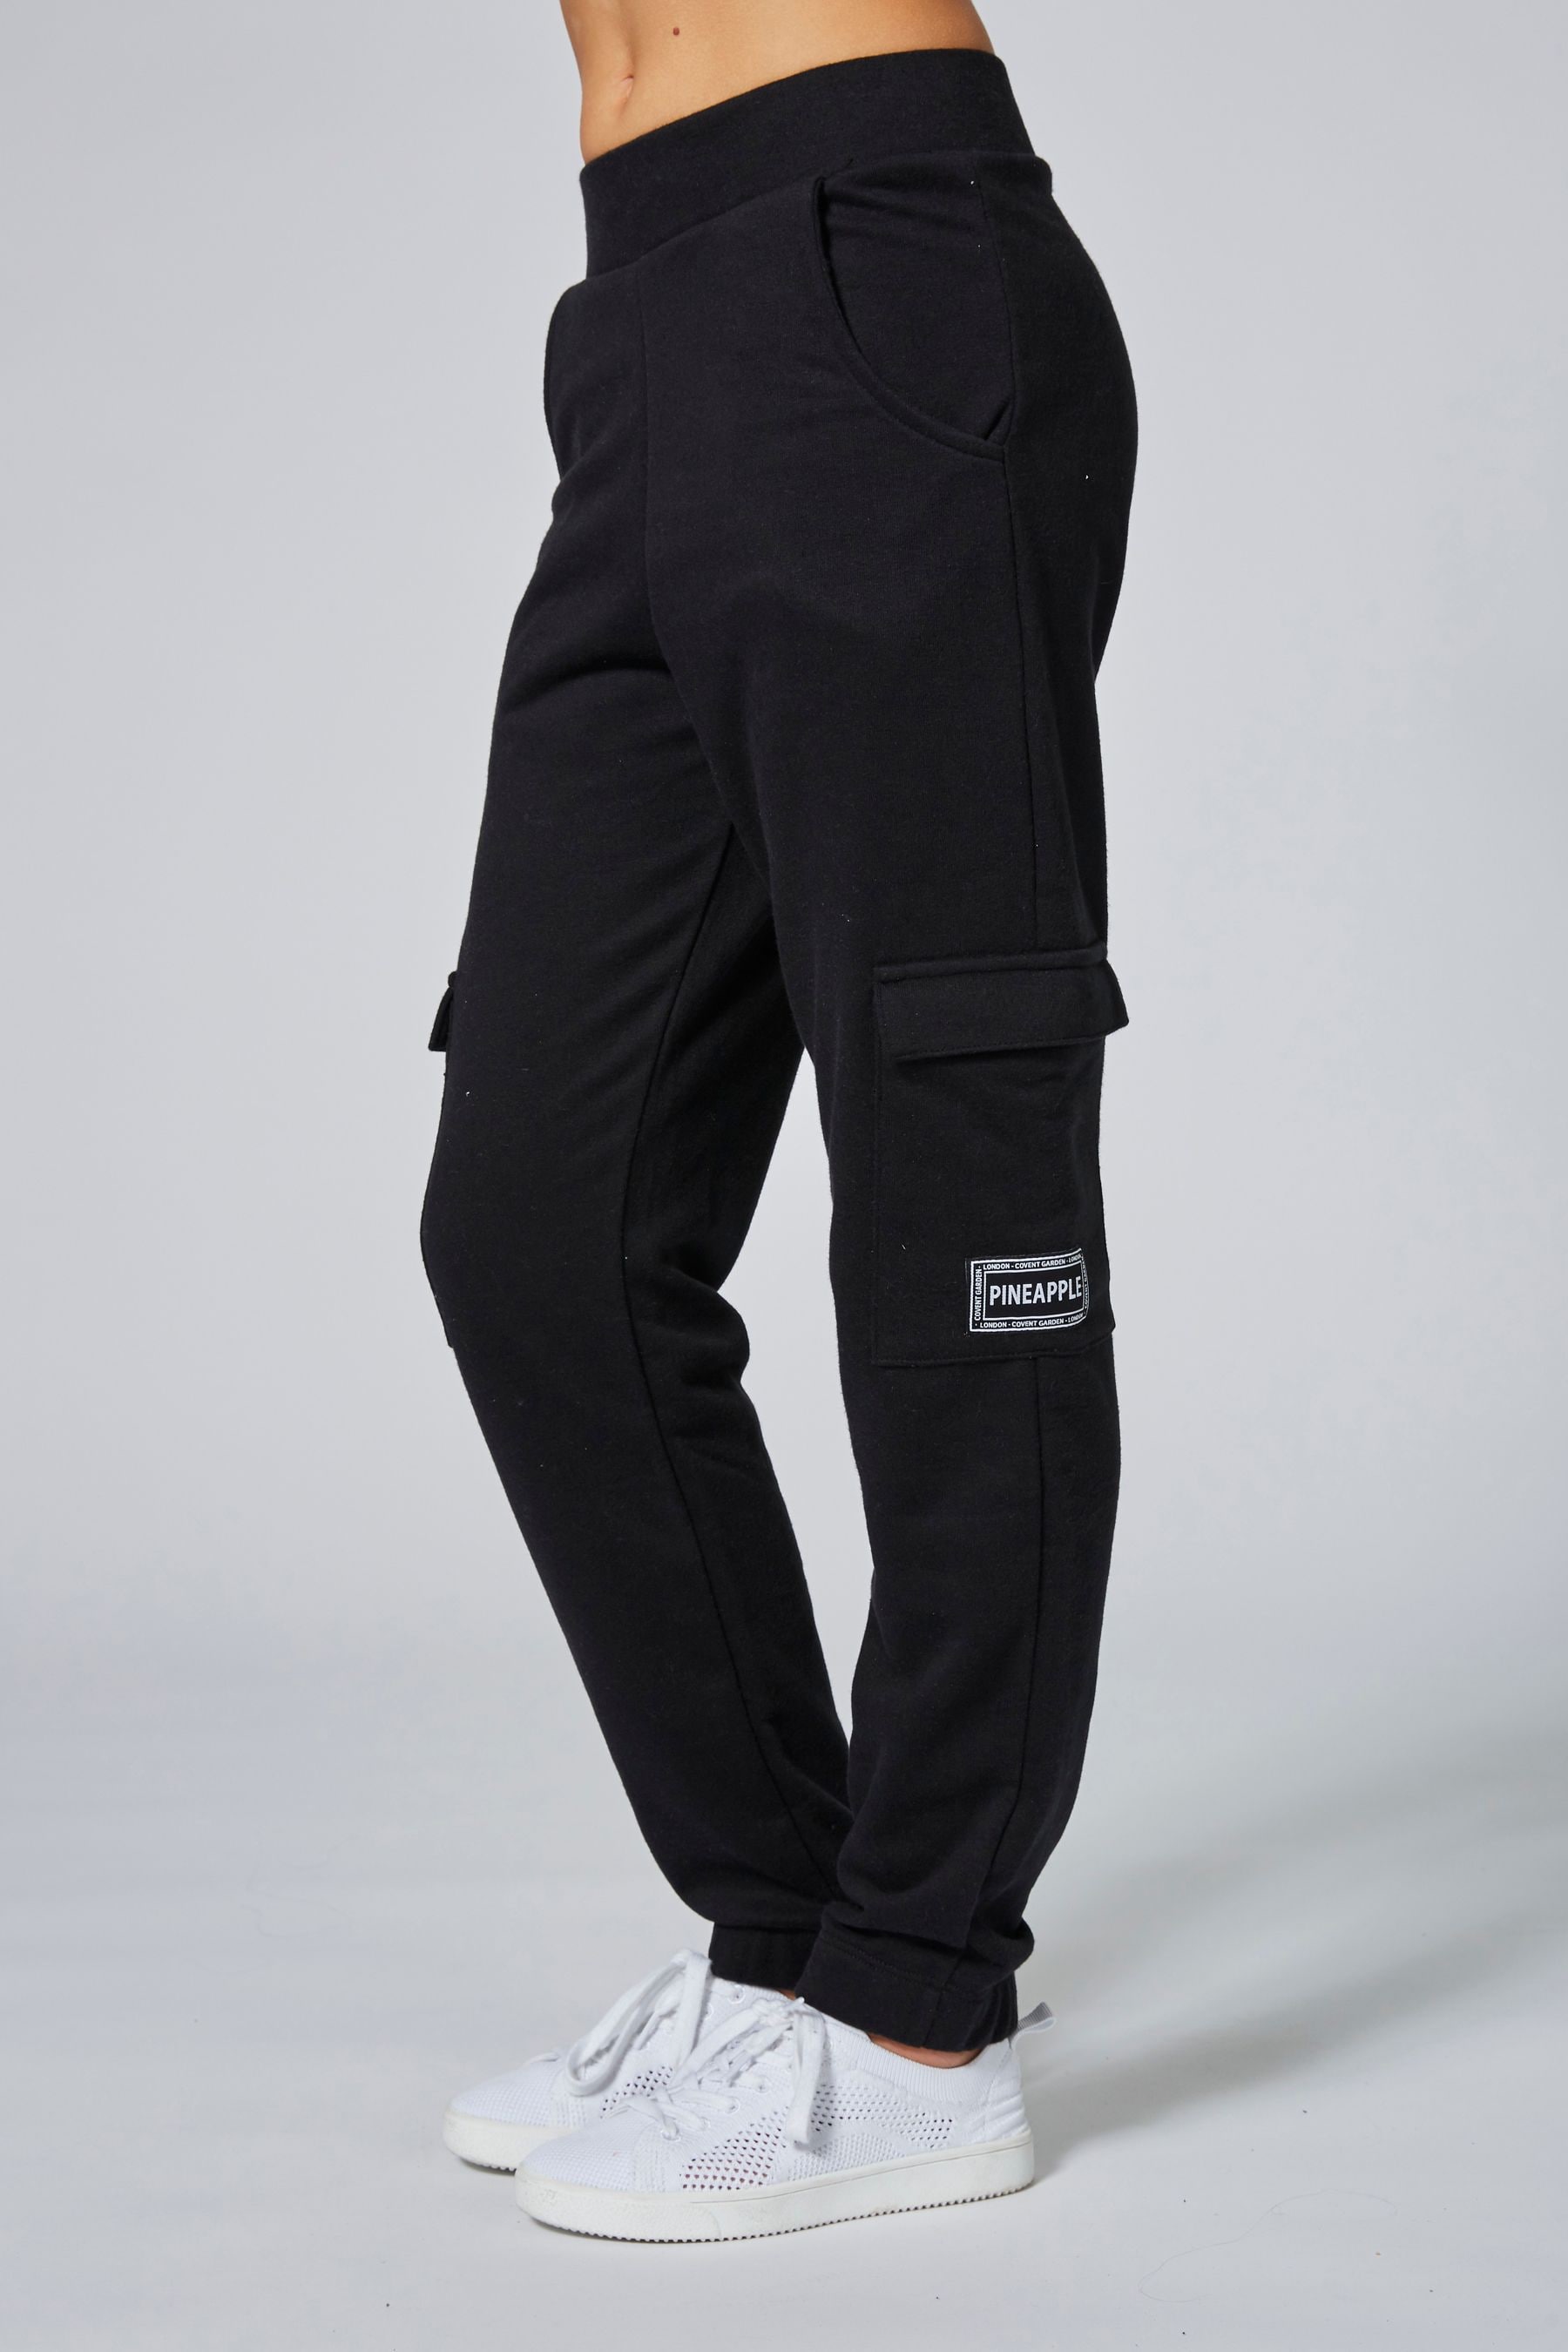 Buy Pineapple Black Cargo Joggers from the Next UK online shop